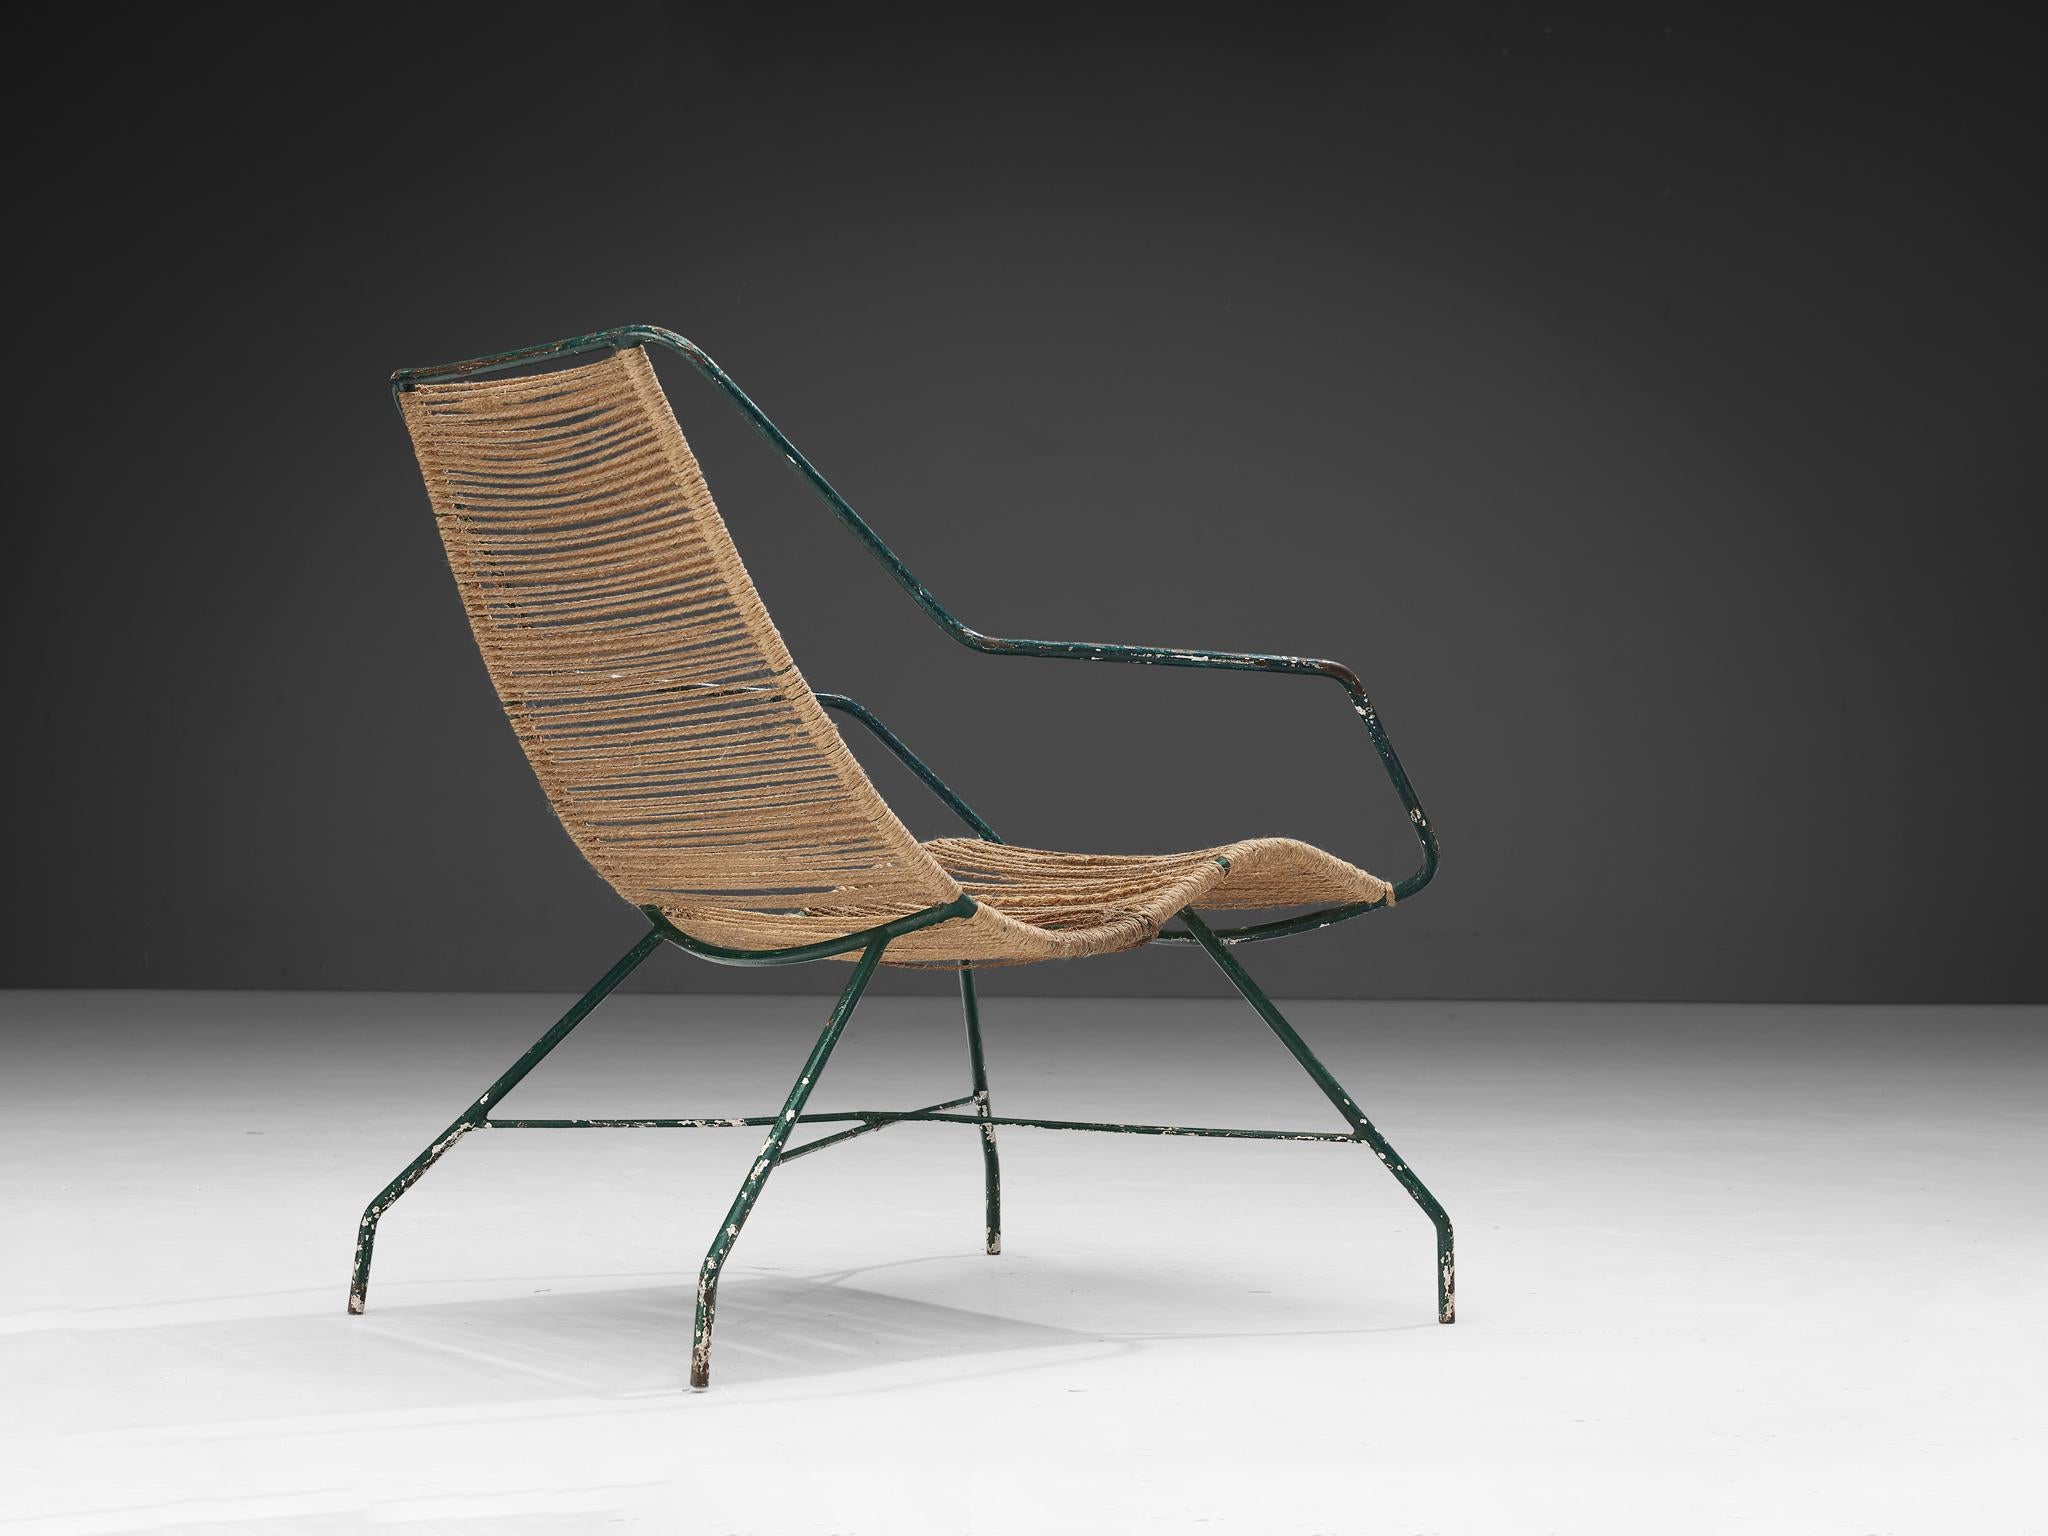 Martin Eisler and Carlo Hauner for Forma, lounge chair, iron and rope, Brazil, 1950s.

Elegant and modern armchair by Brazilian designer duo Hauner & Eisler. The thin, elegant frame is made in green lacquered iron. Due the diagonal connection and